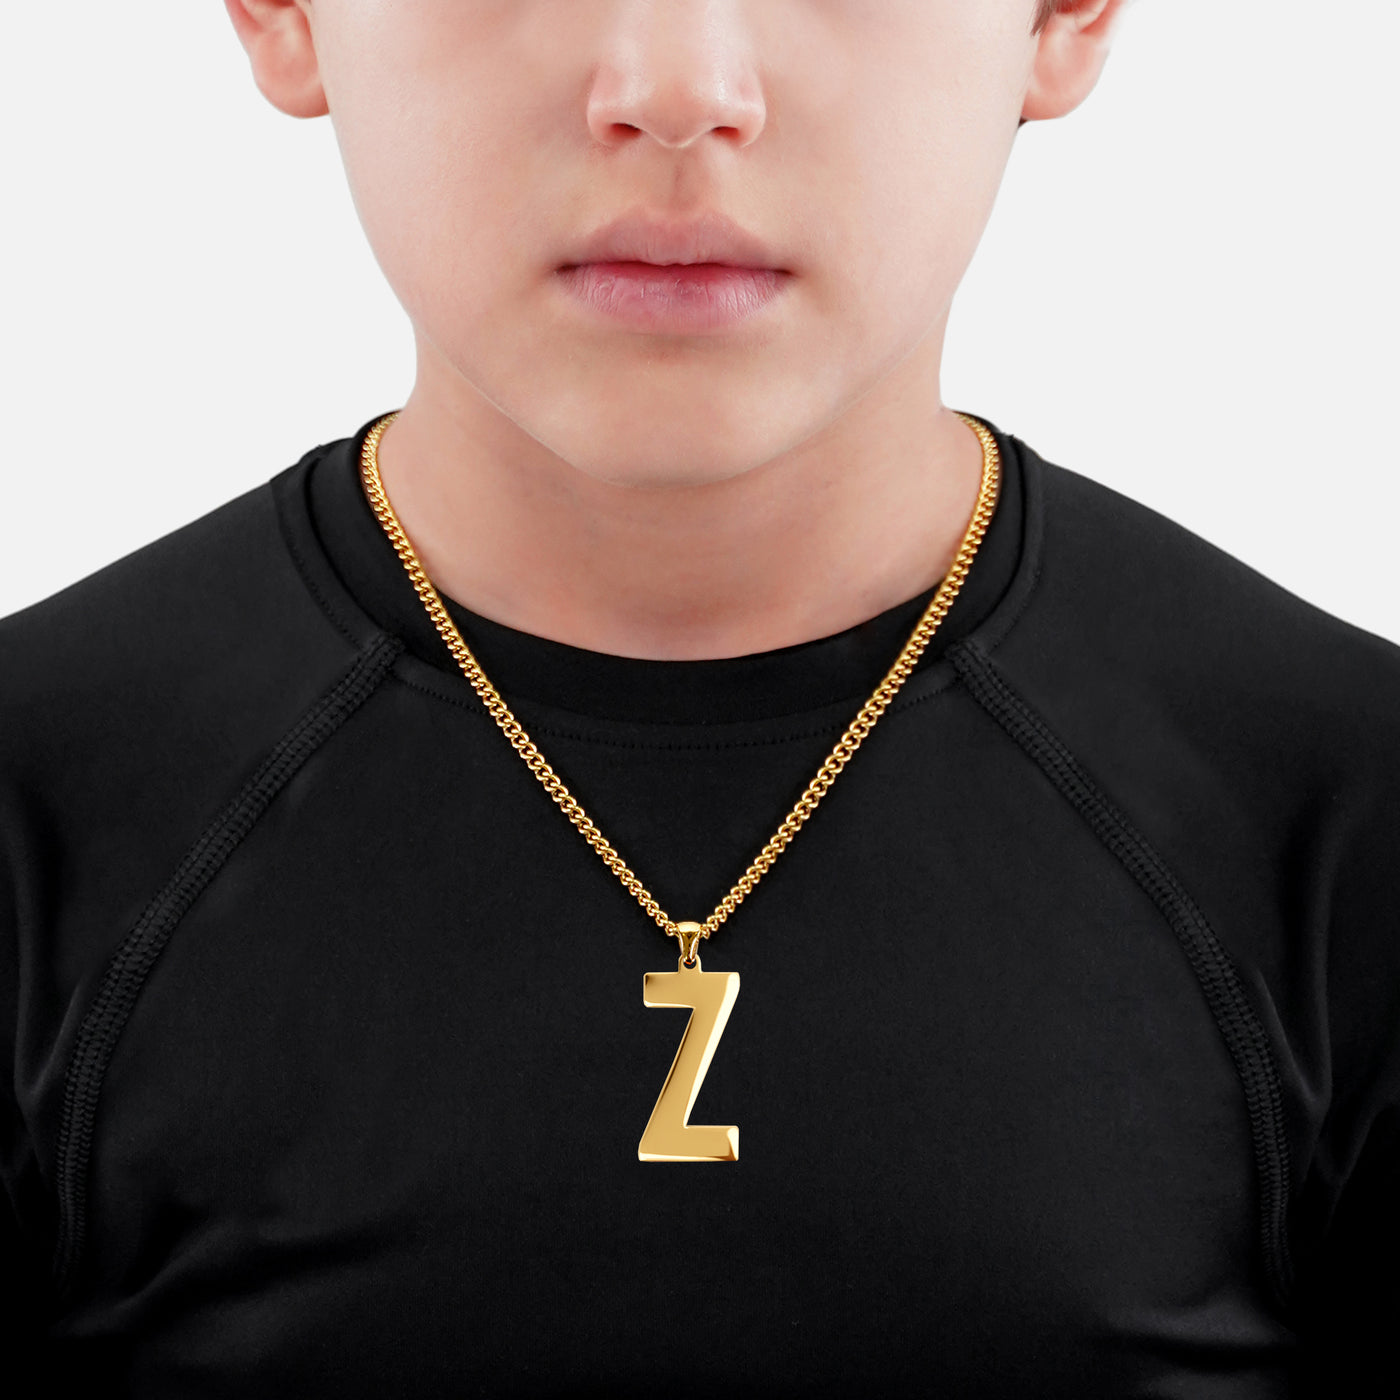 Z Letter Pendant with Chain Kids Necklace - Gold Plated Stainless Steel